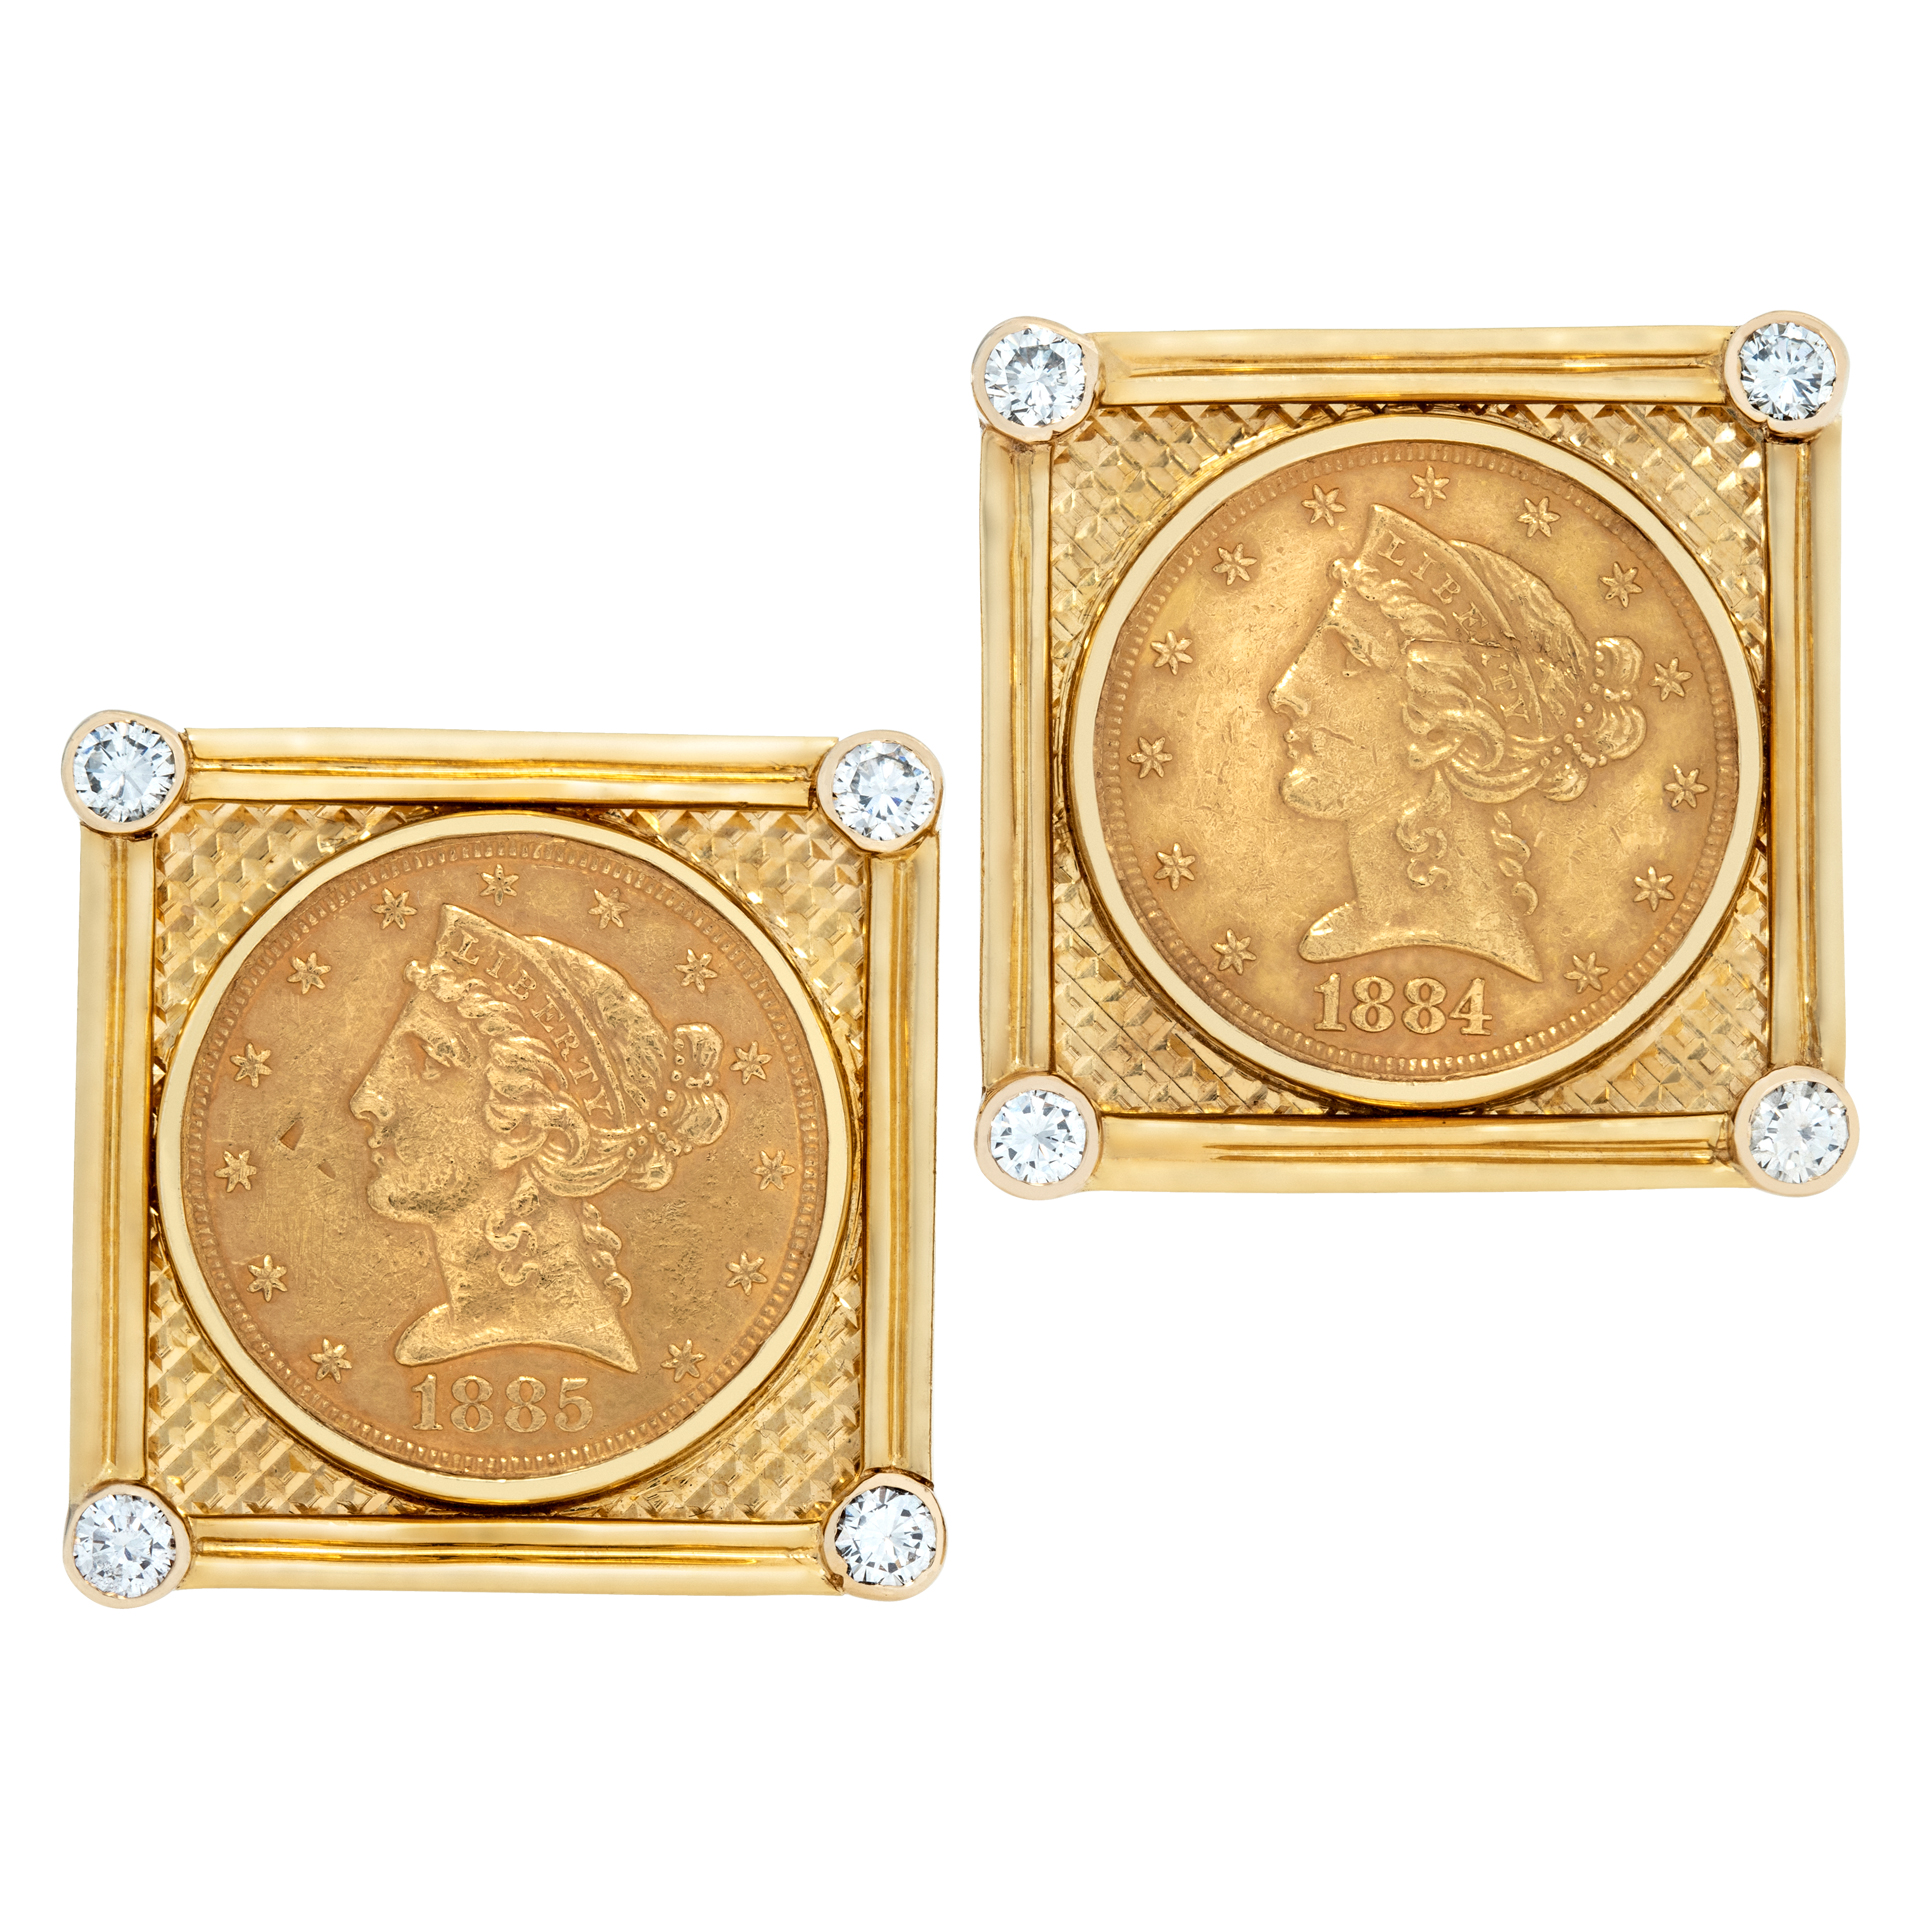 Earrings US gold coin in 18k with diamond accents